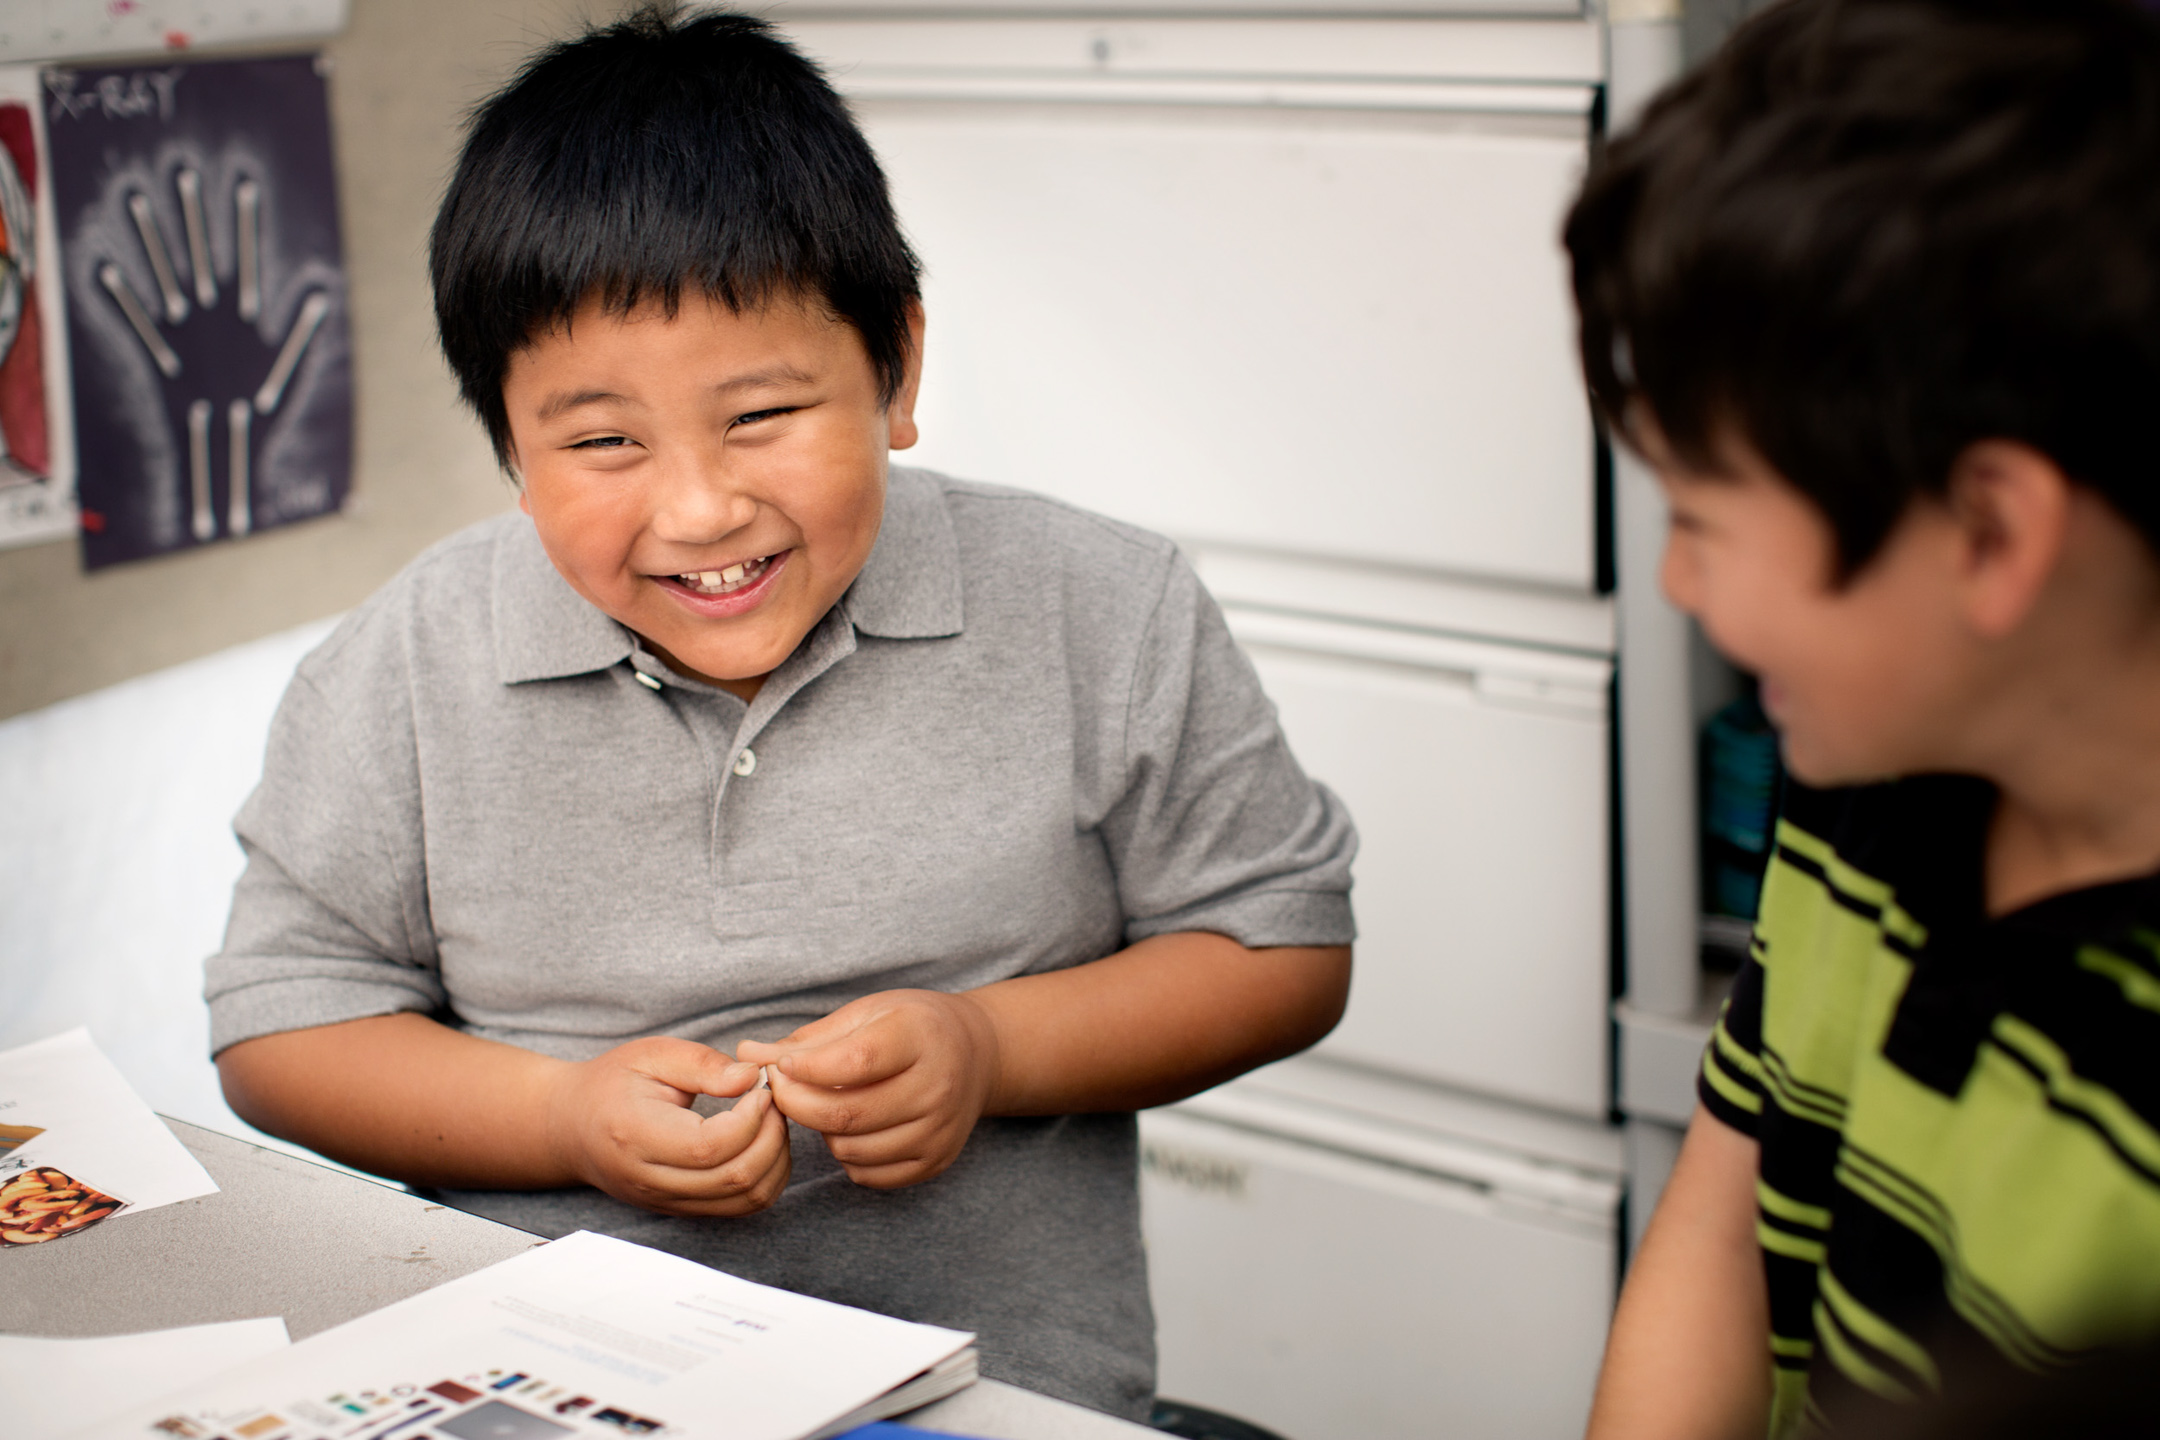 A boy laughs with a classmate during art class at an elementary school